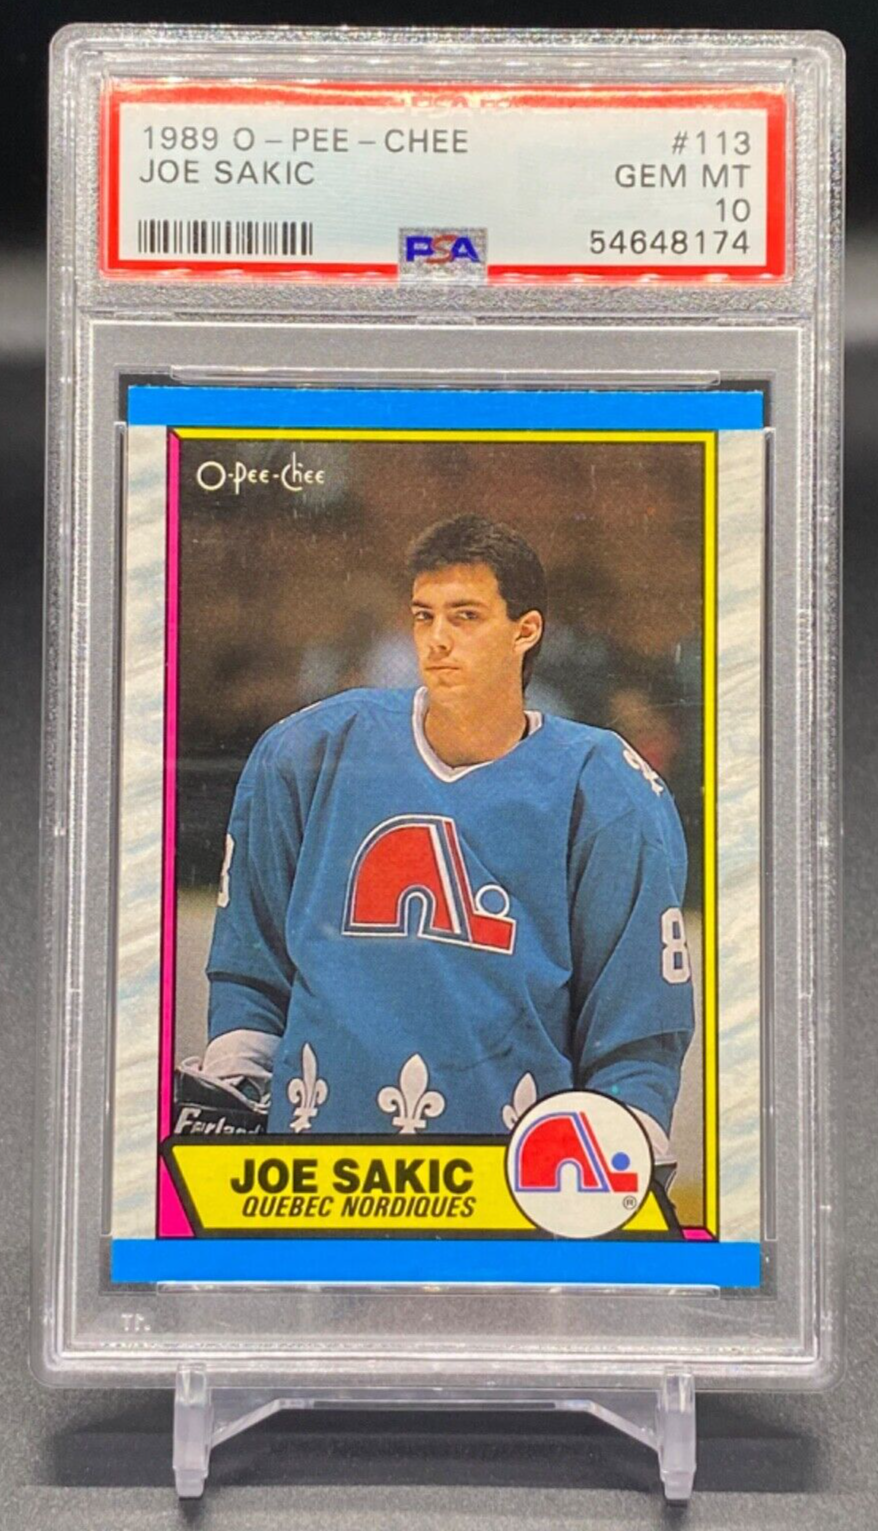 NHL Cards from the Junk Wax Era